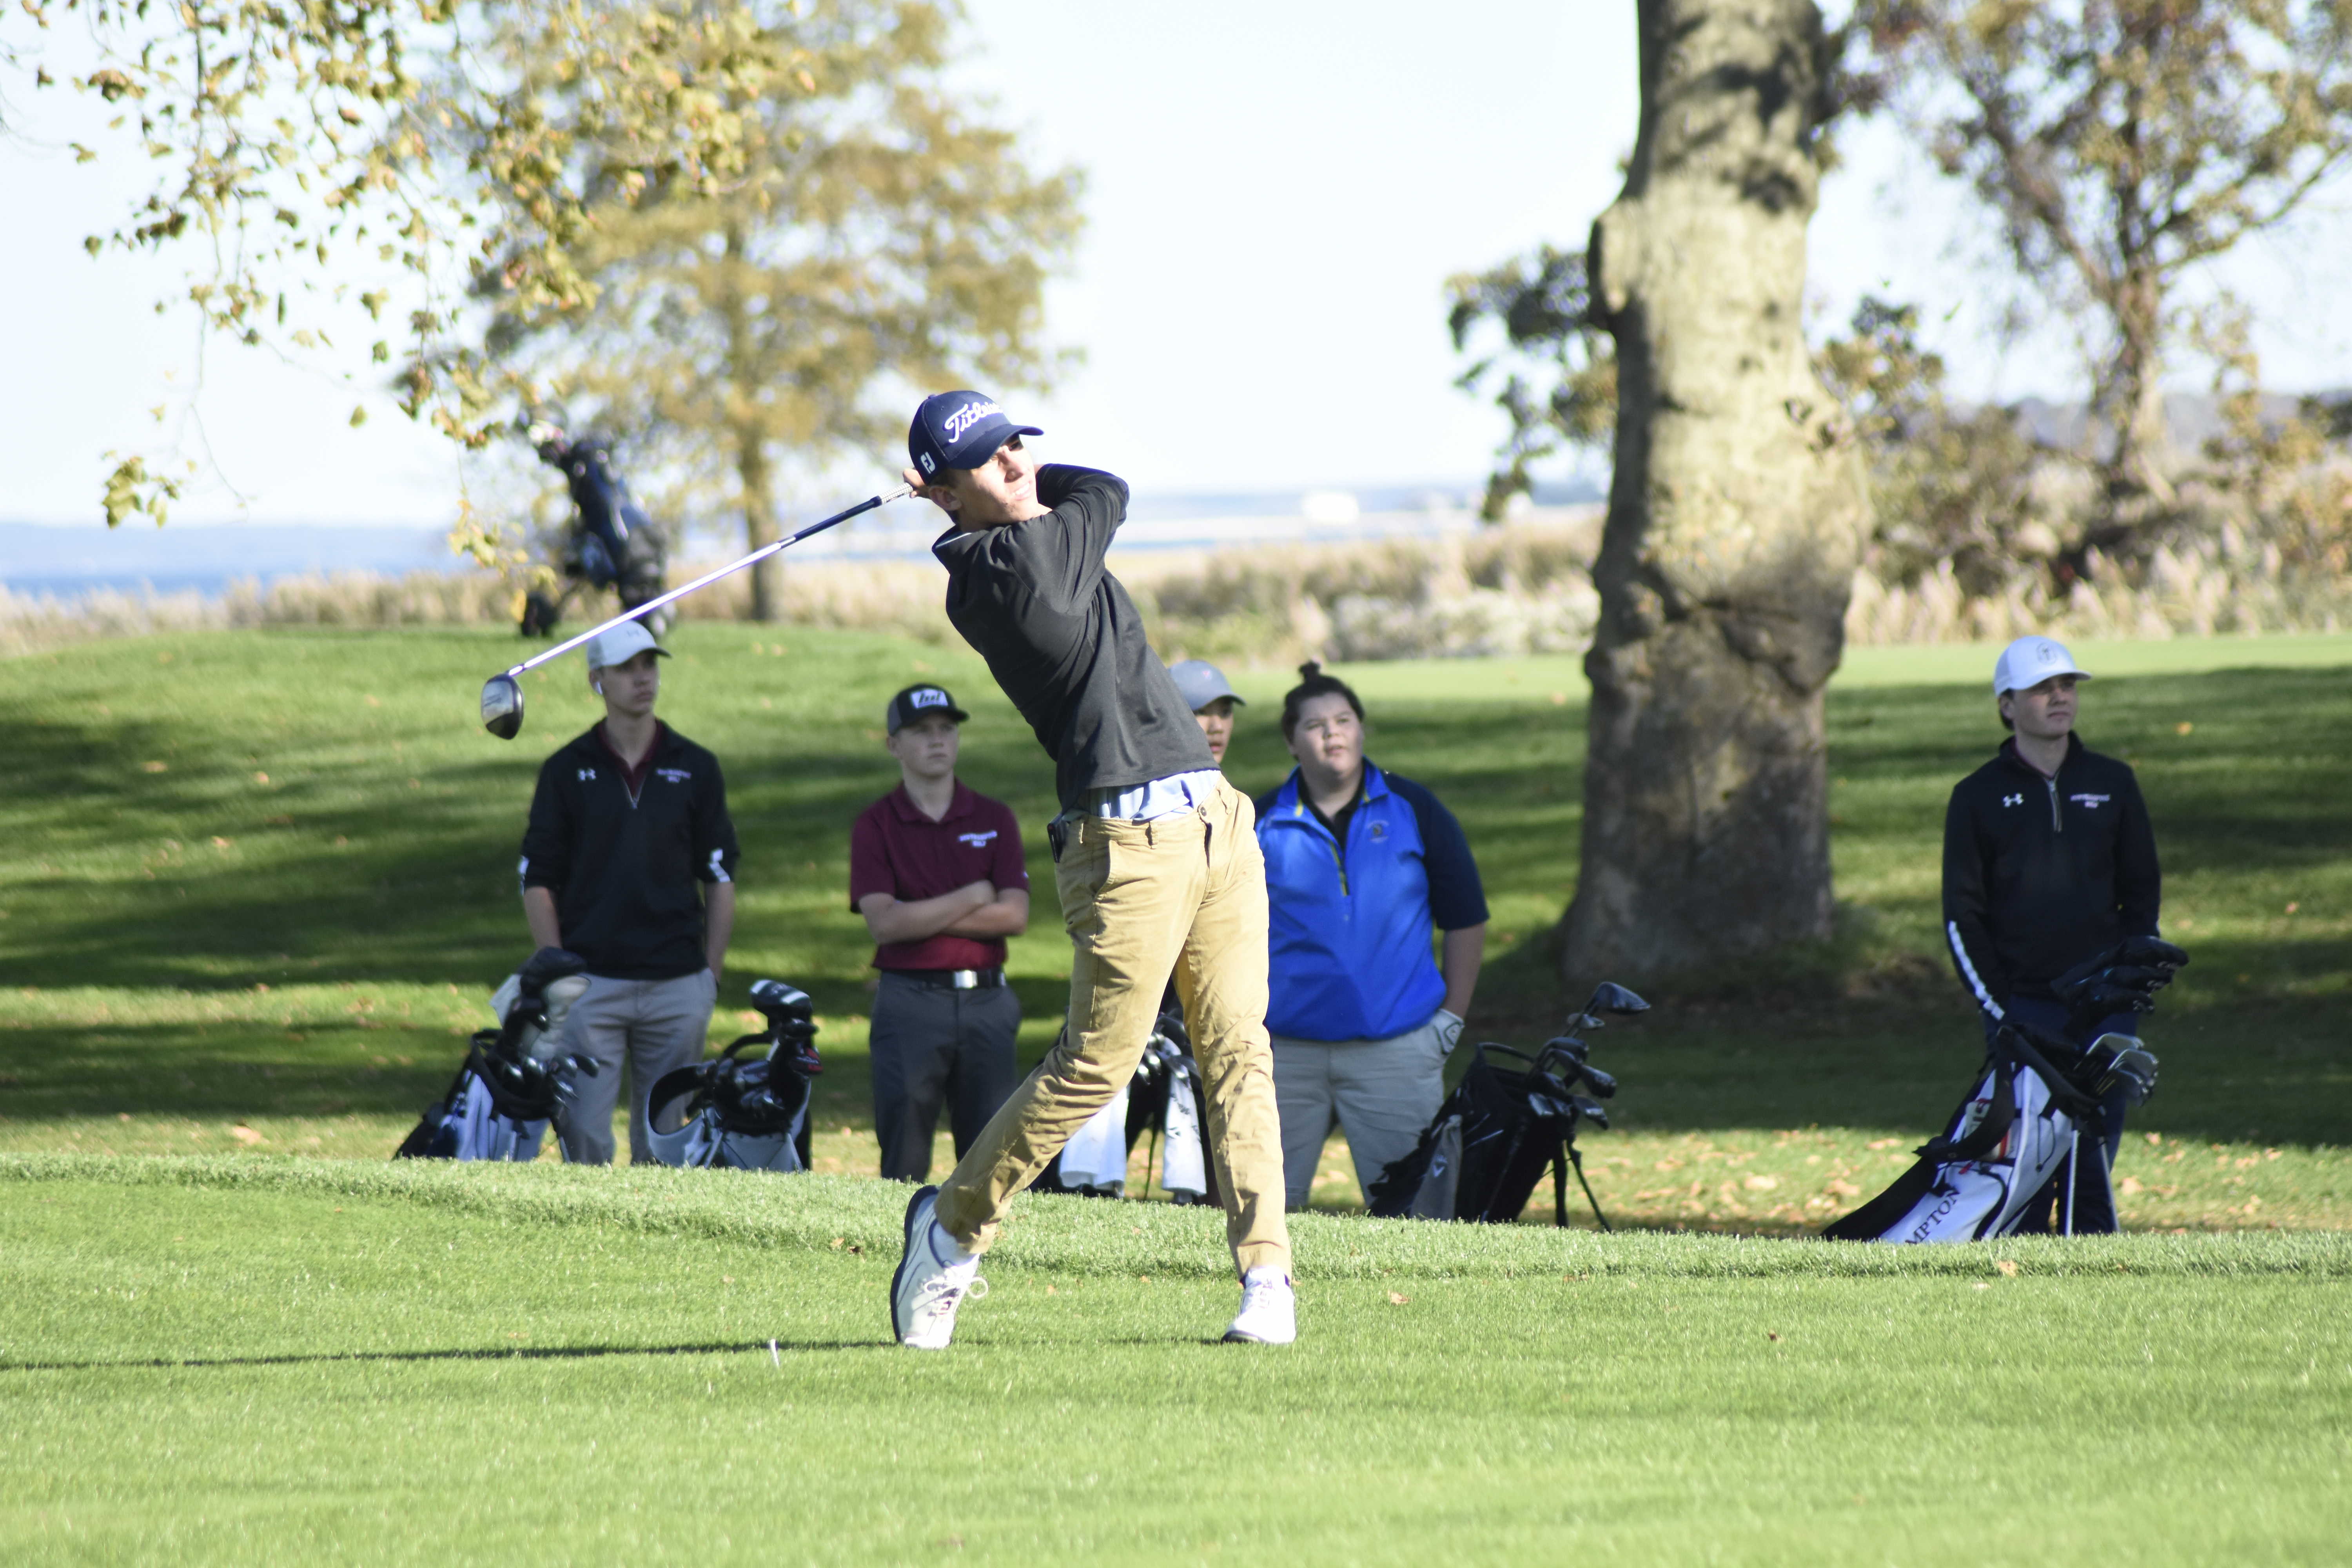 Matthew Meyer of Westhampton Beach tees off at the 10th hole at Indian Island Golf Club in Riverhead at the start of the quarterfinal match between the Mariners and Hurricanes on Thursday, Ocotber 24.